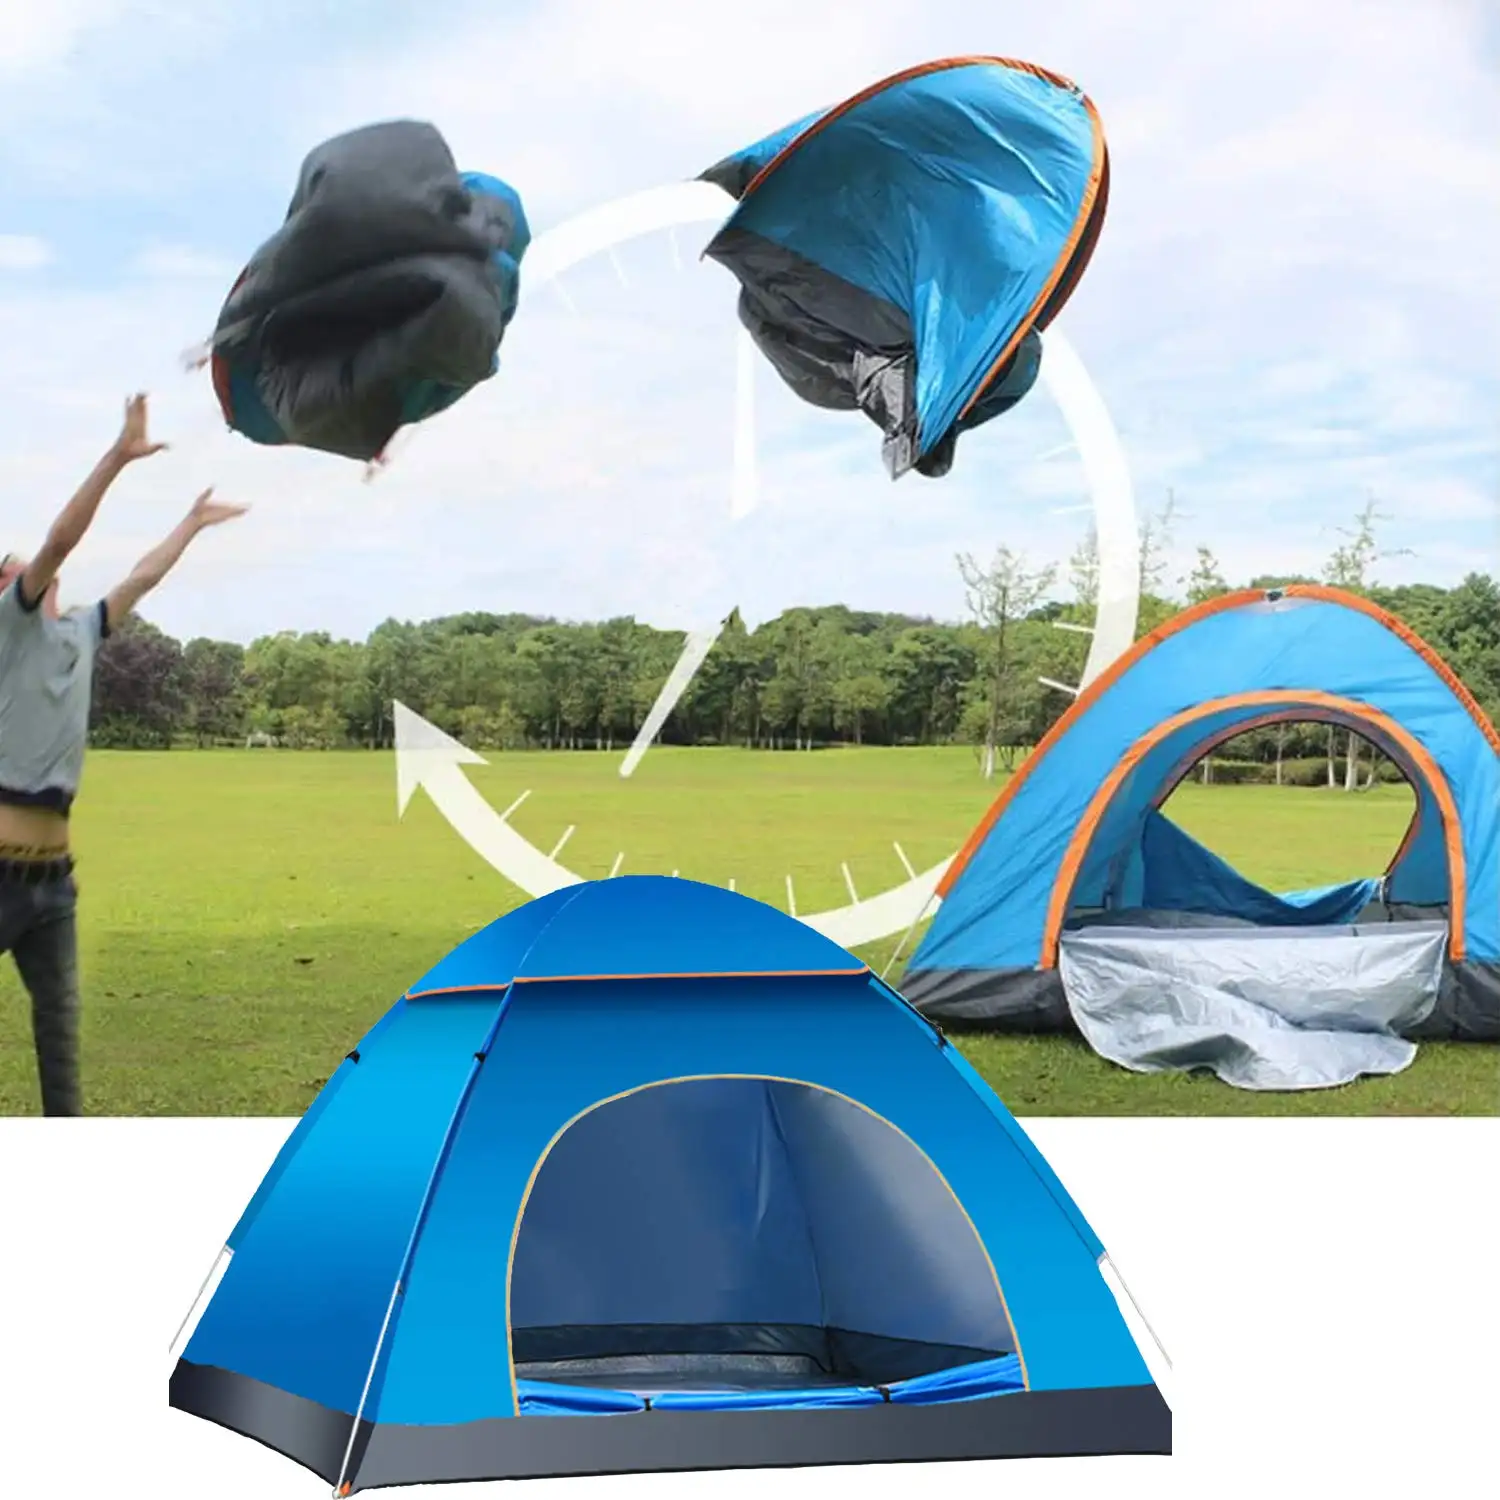 Outdoor camping folding automatic tent 3-4 people beach easy speed open double pop up Family Travel tent